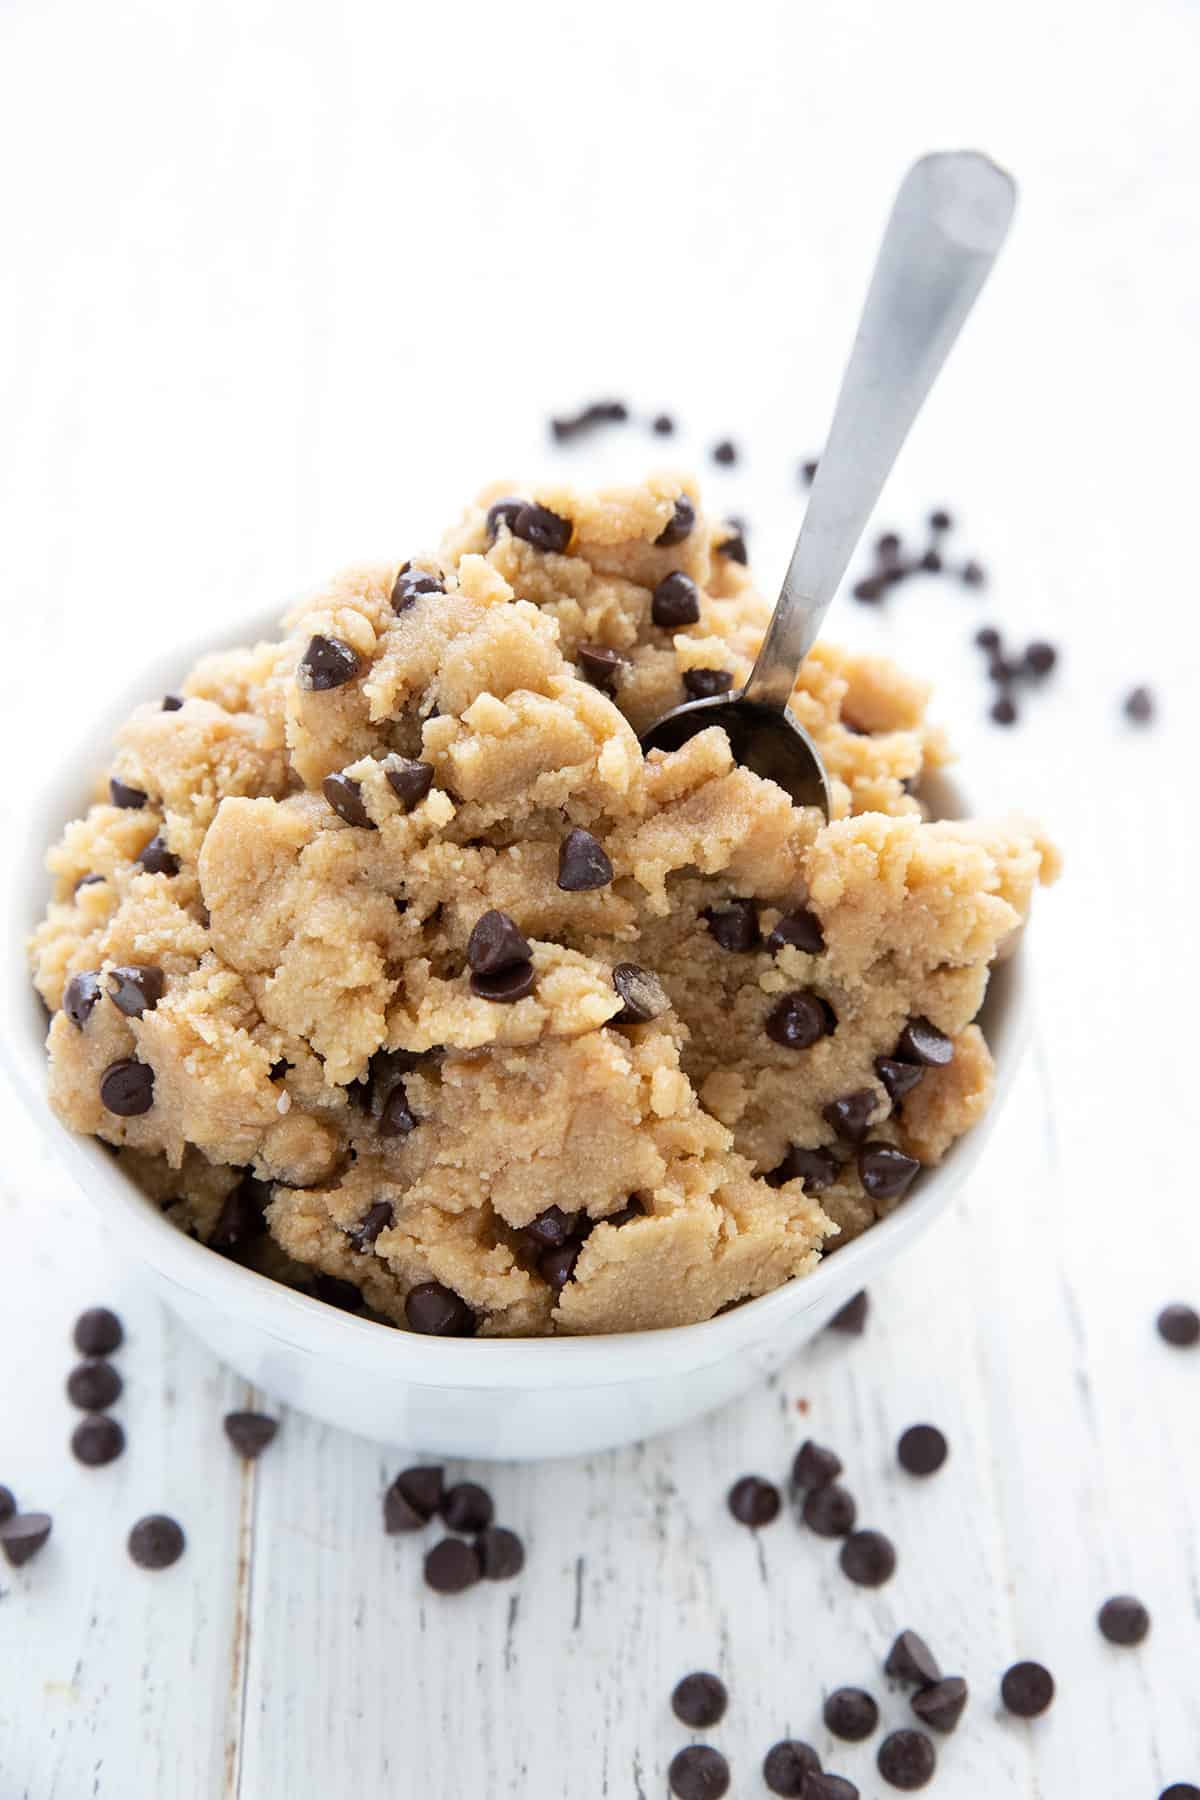 Edible keto cookie dough piled in a white bowl with a small spoon, and chocolate chips strewn around.